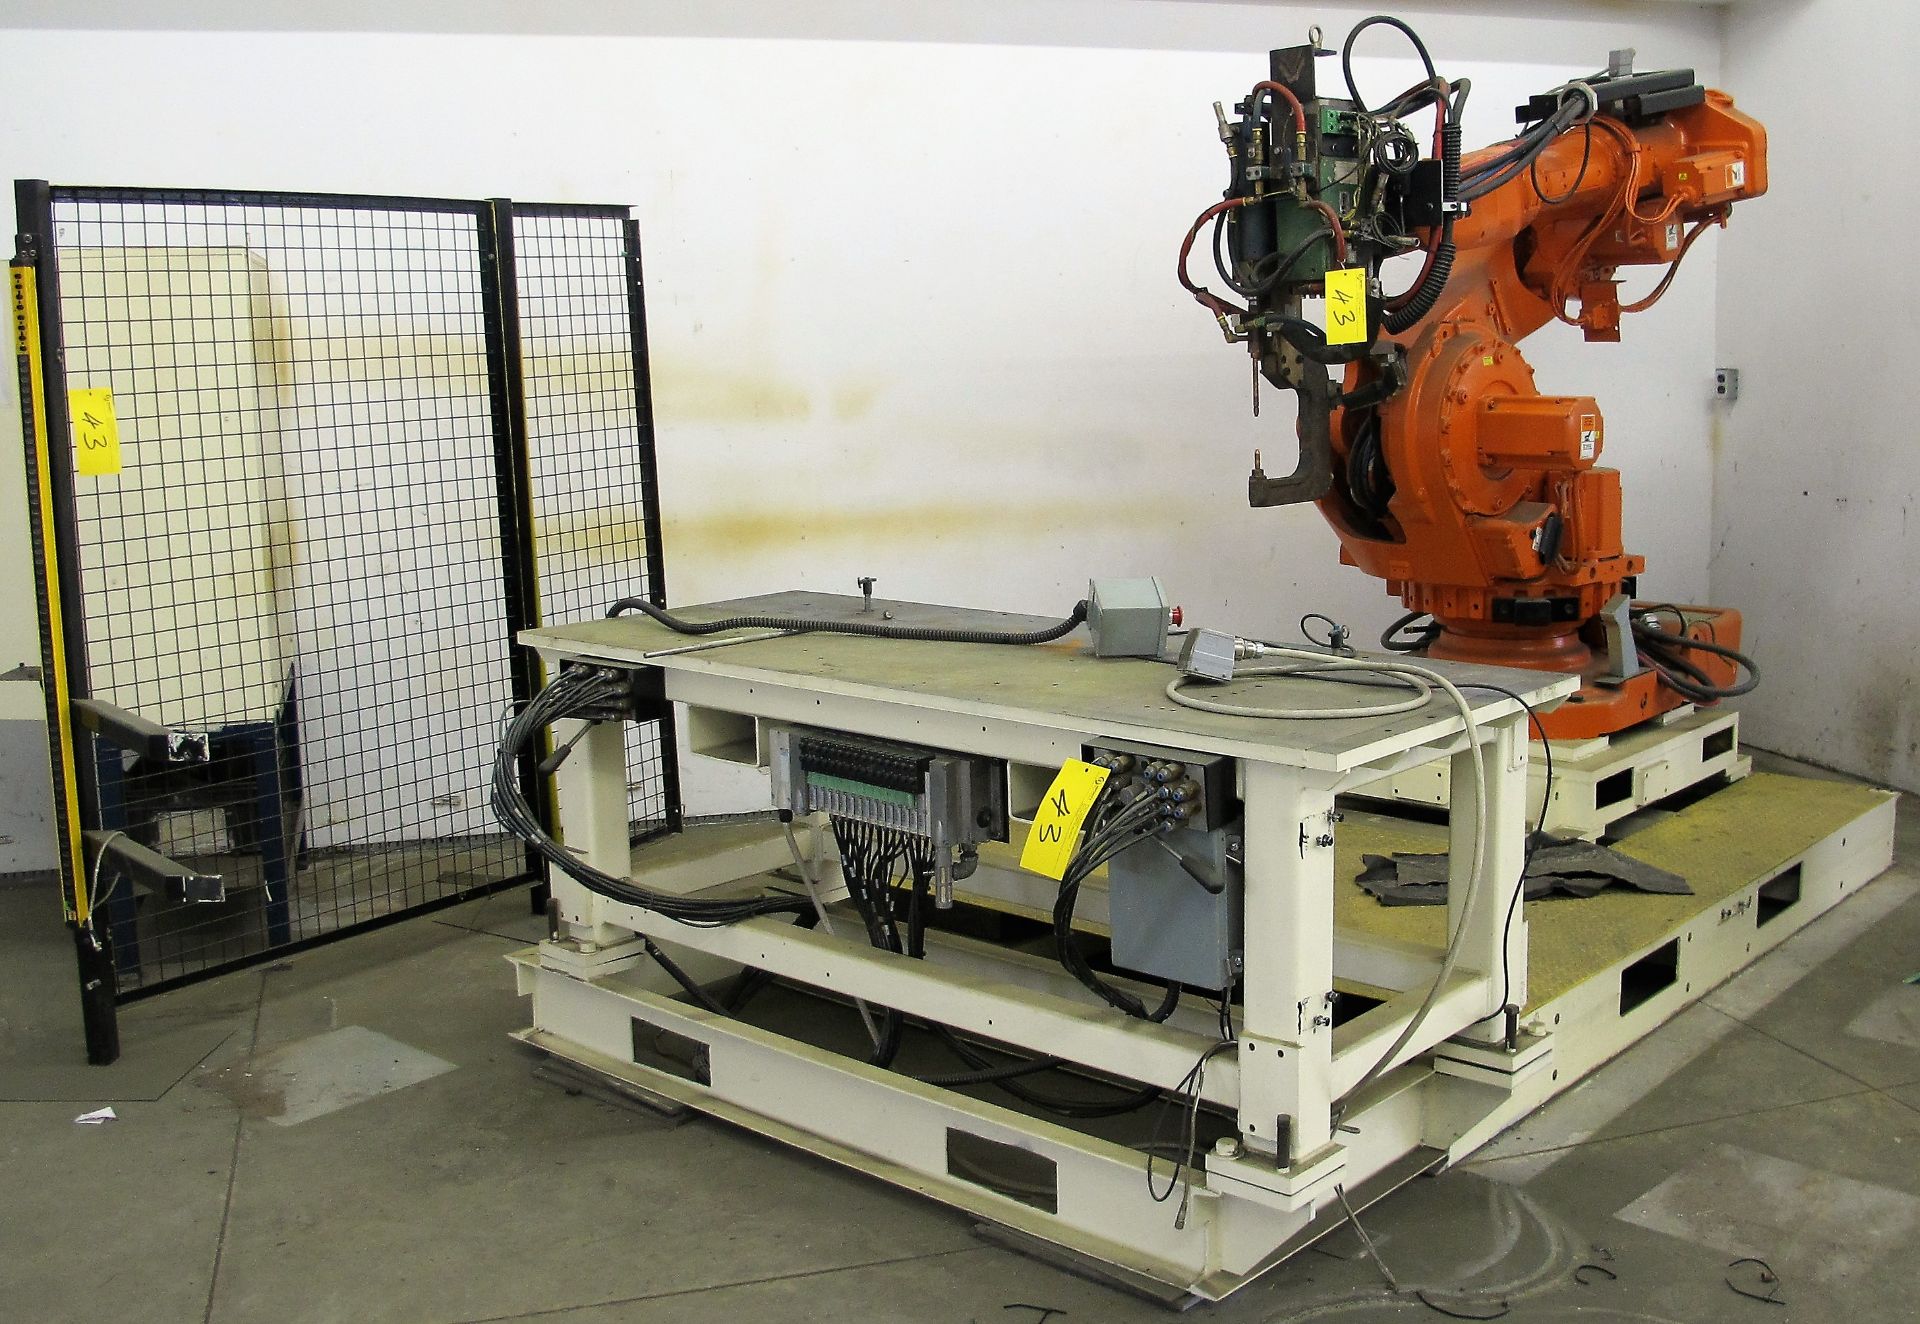 ROBOTIC WELDING CELL CONSISTING OF: ABB IRB 6600 M2004 6-AXIS ROBOT (REFURBISHED IN 2014), S/N 66-